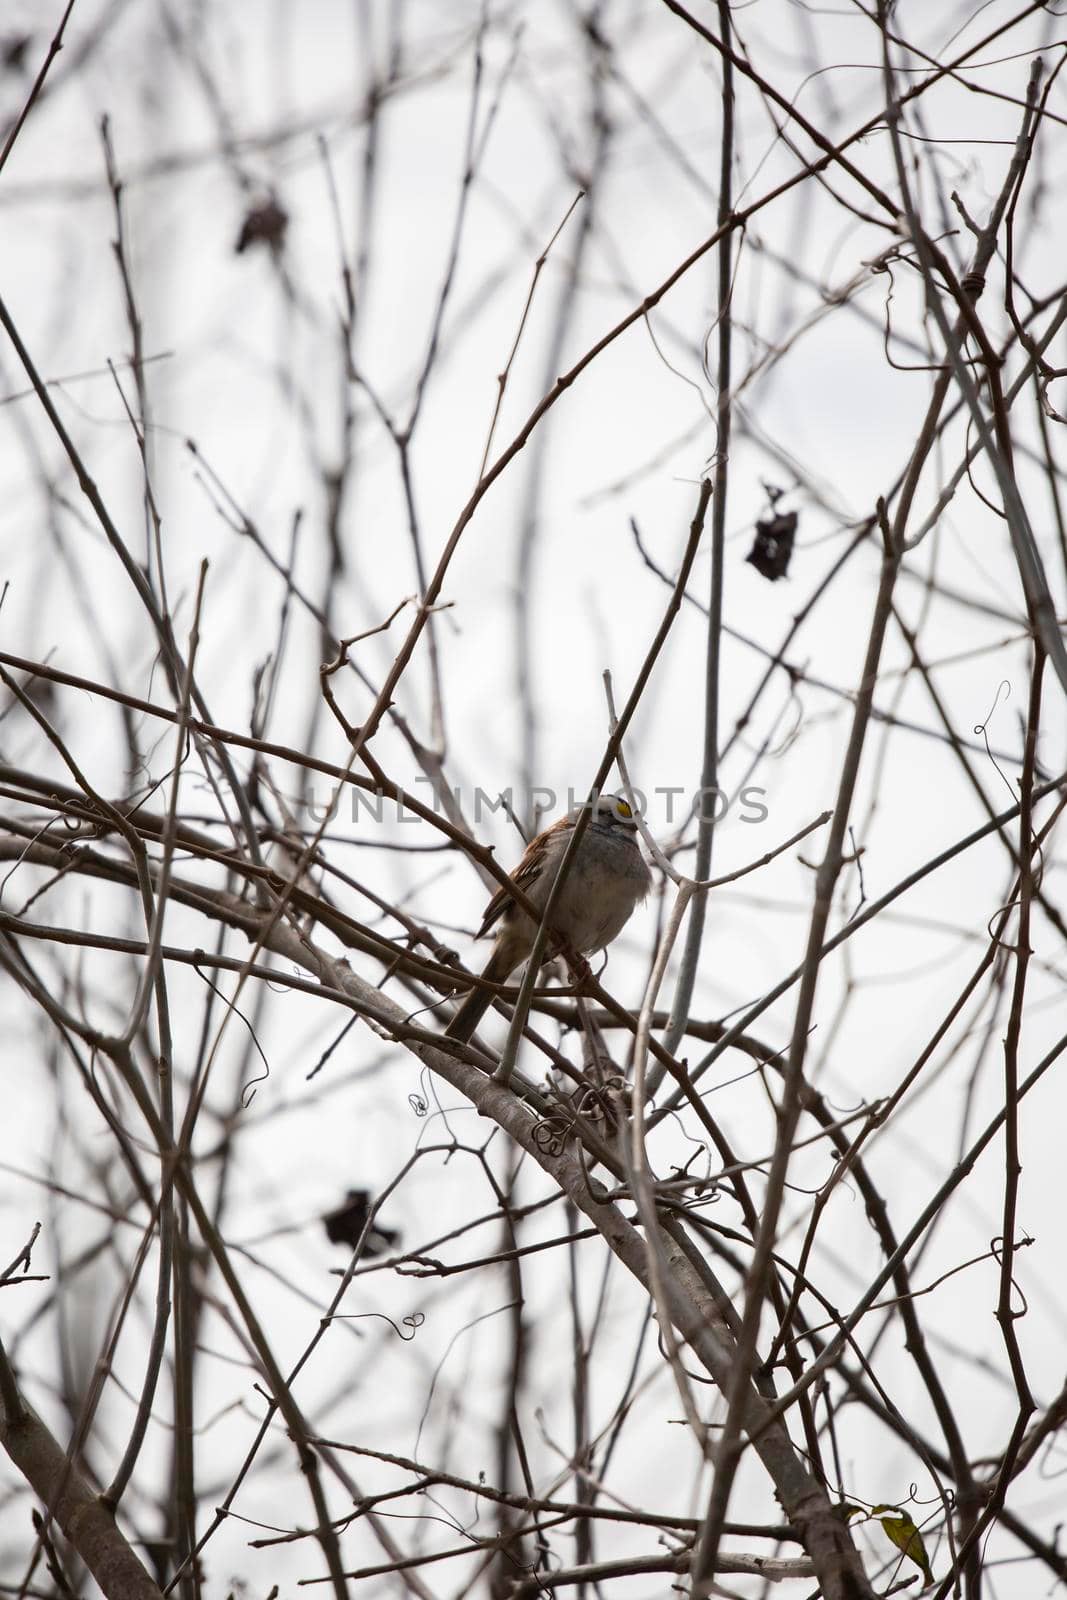 White-Throated Sparrow on an Overcast Day by tornado98